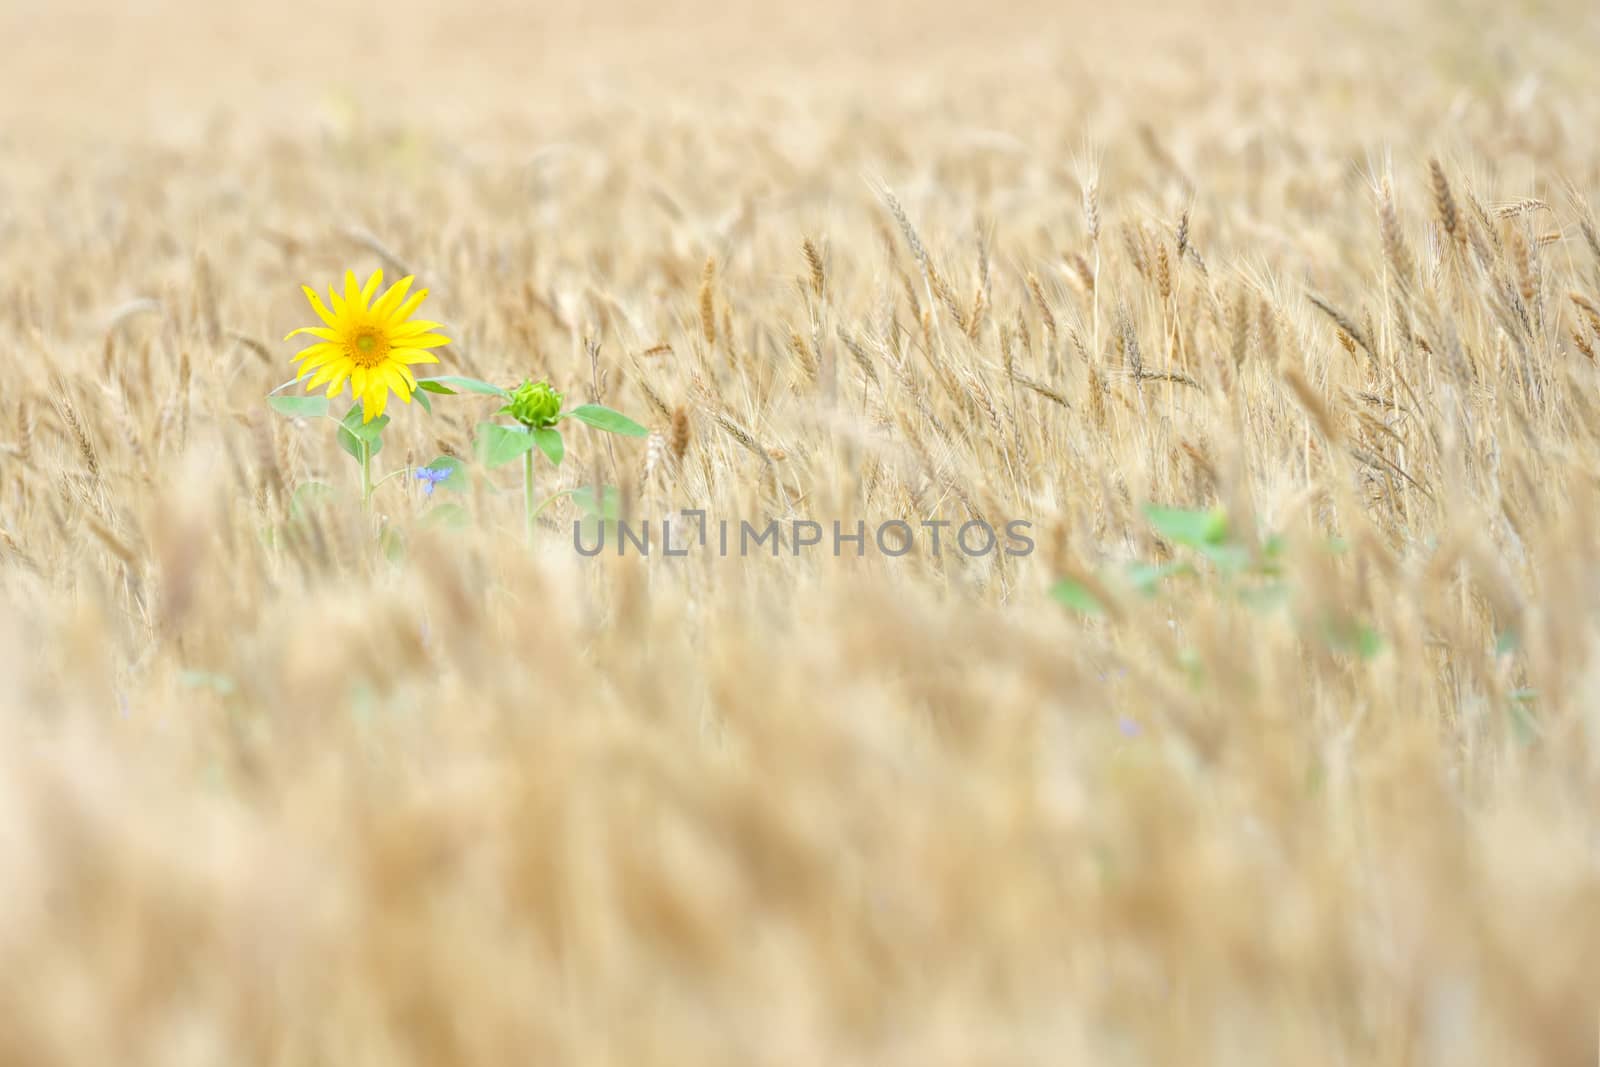 Isolated Sunflower in a wheat field